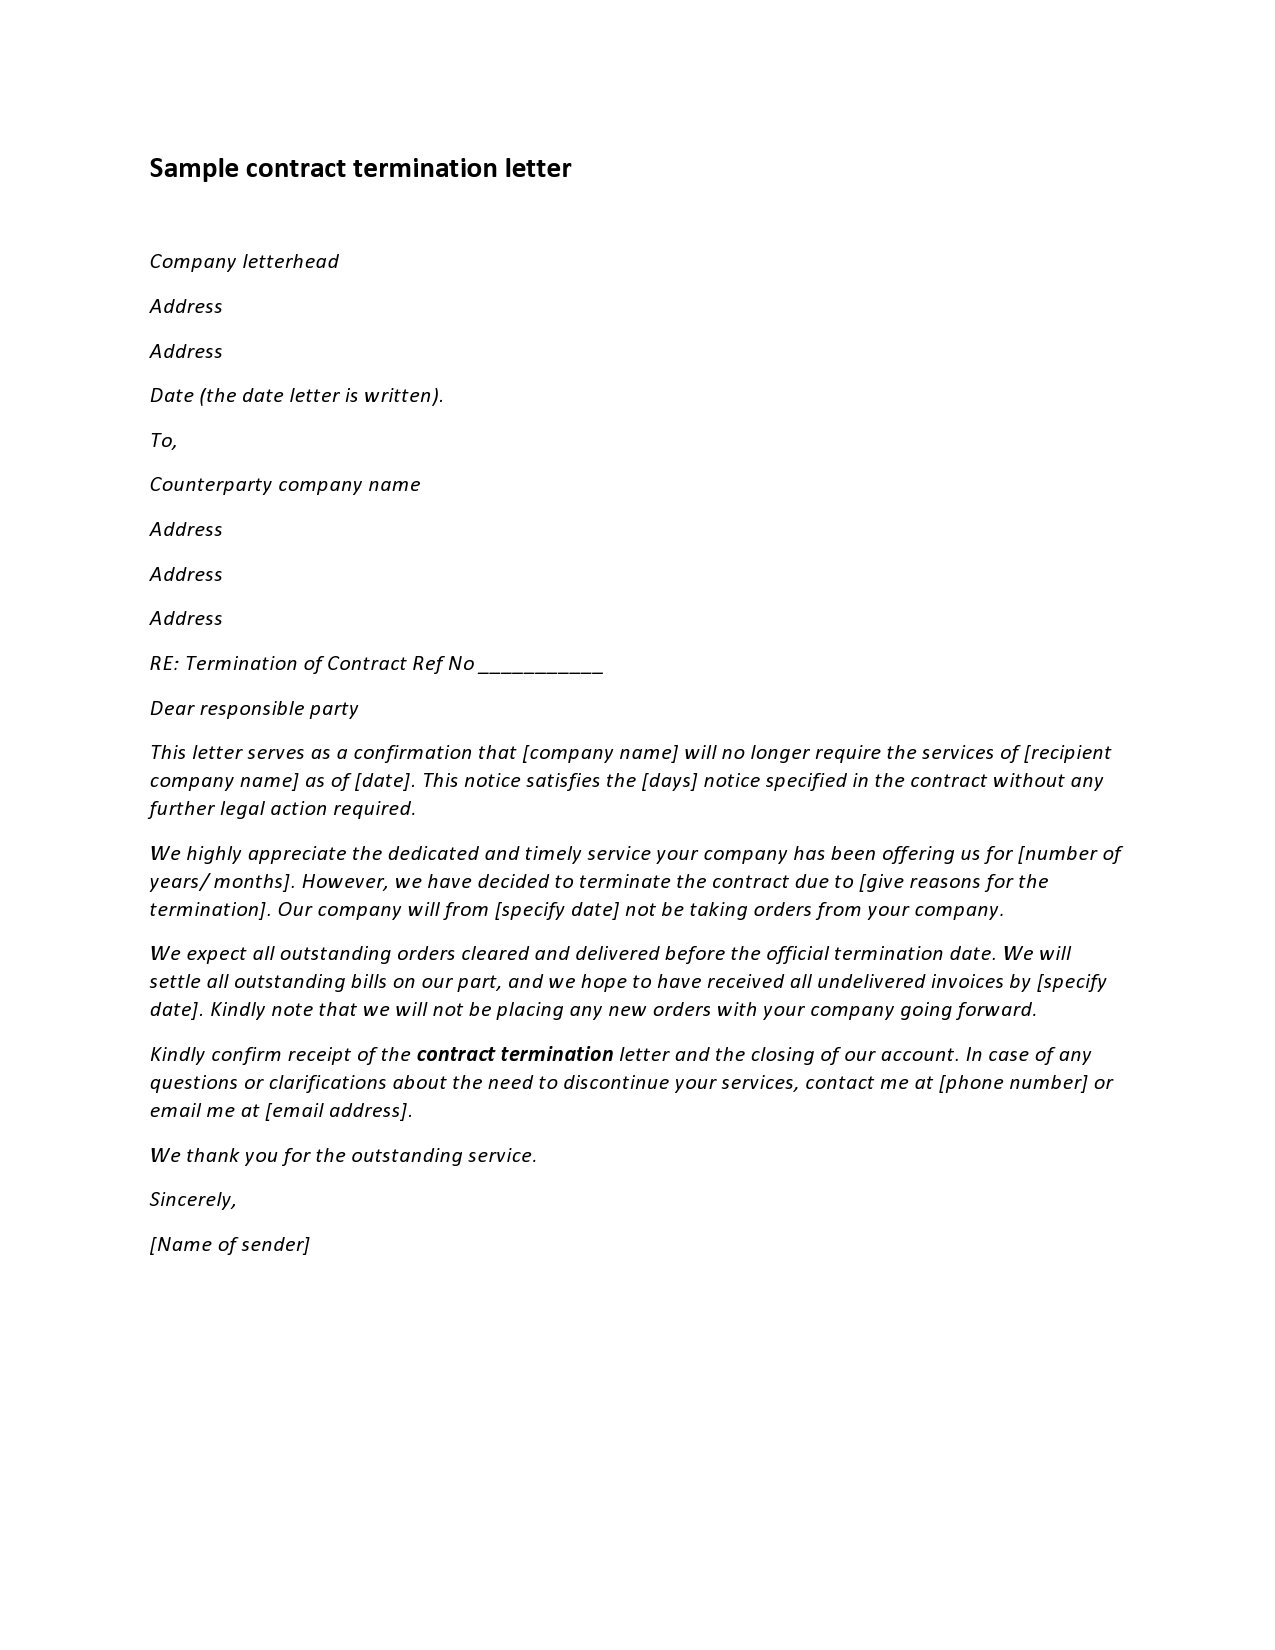 Free contract termination letter 46